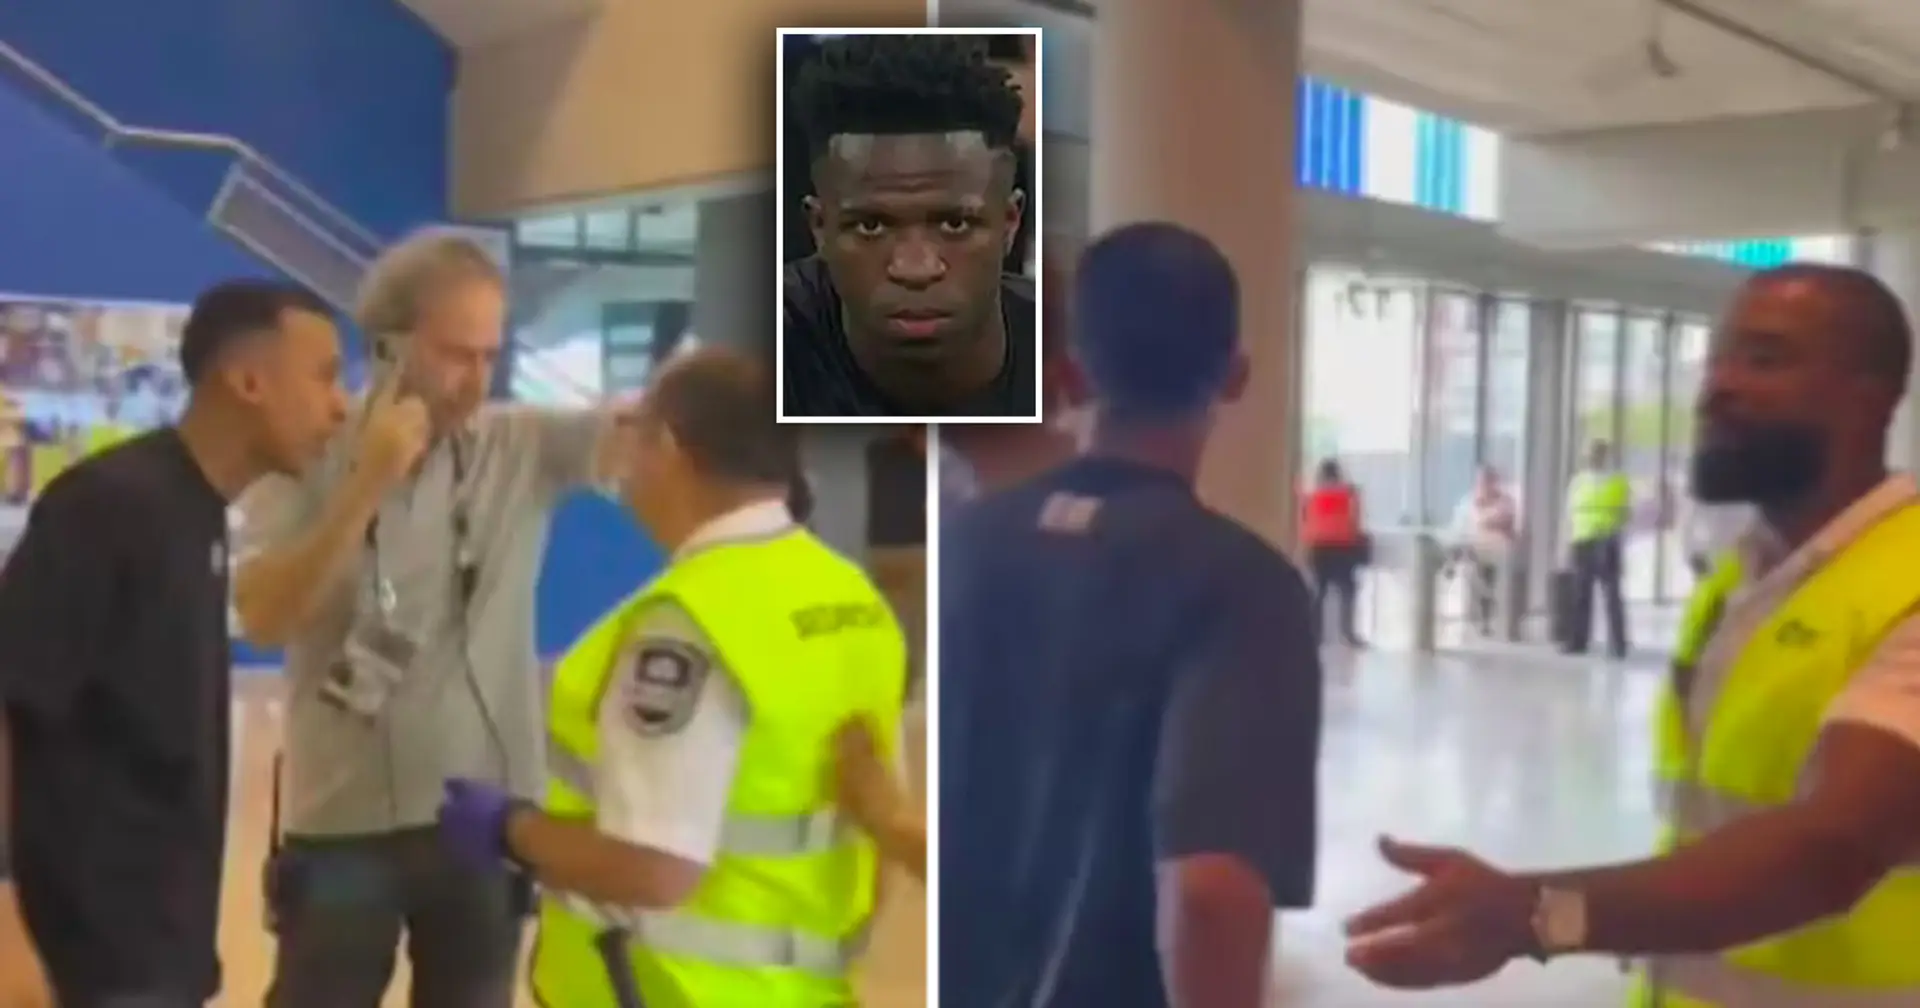 Black man in Vinicius' entourage shown banana and told 'hands up' before Brazil game in Spain